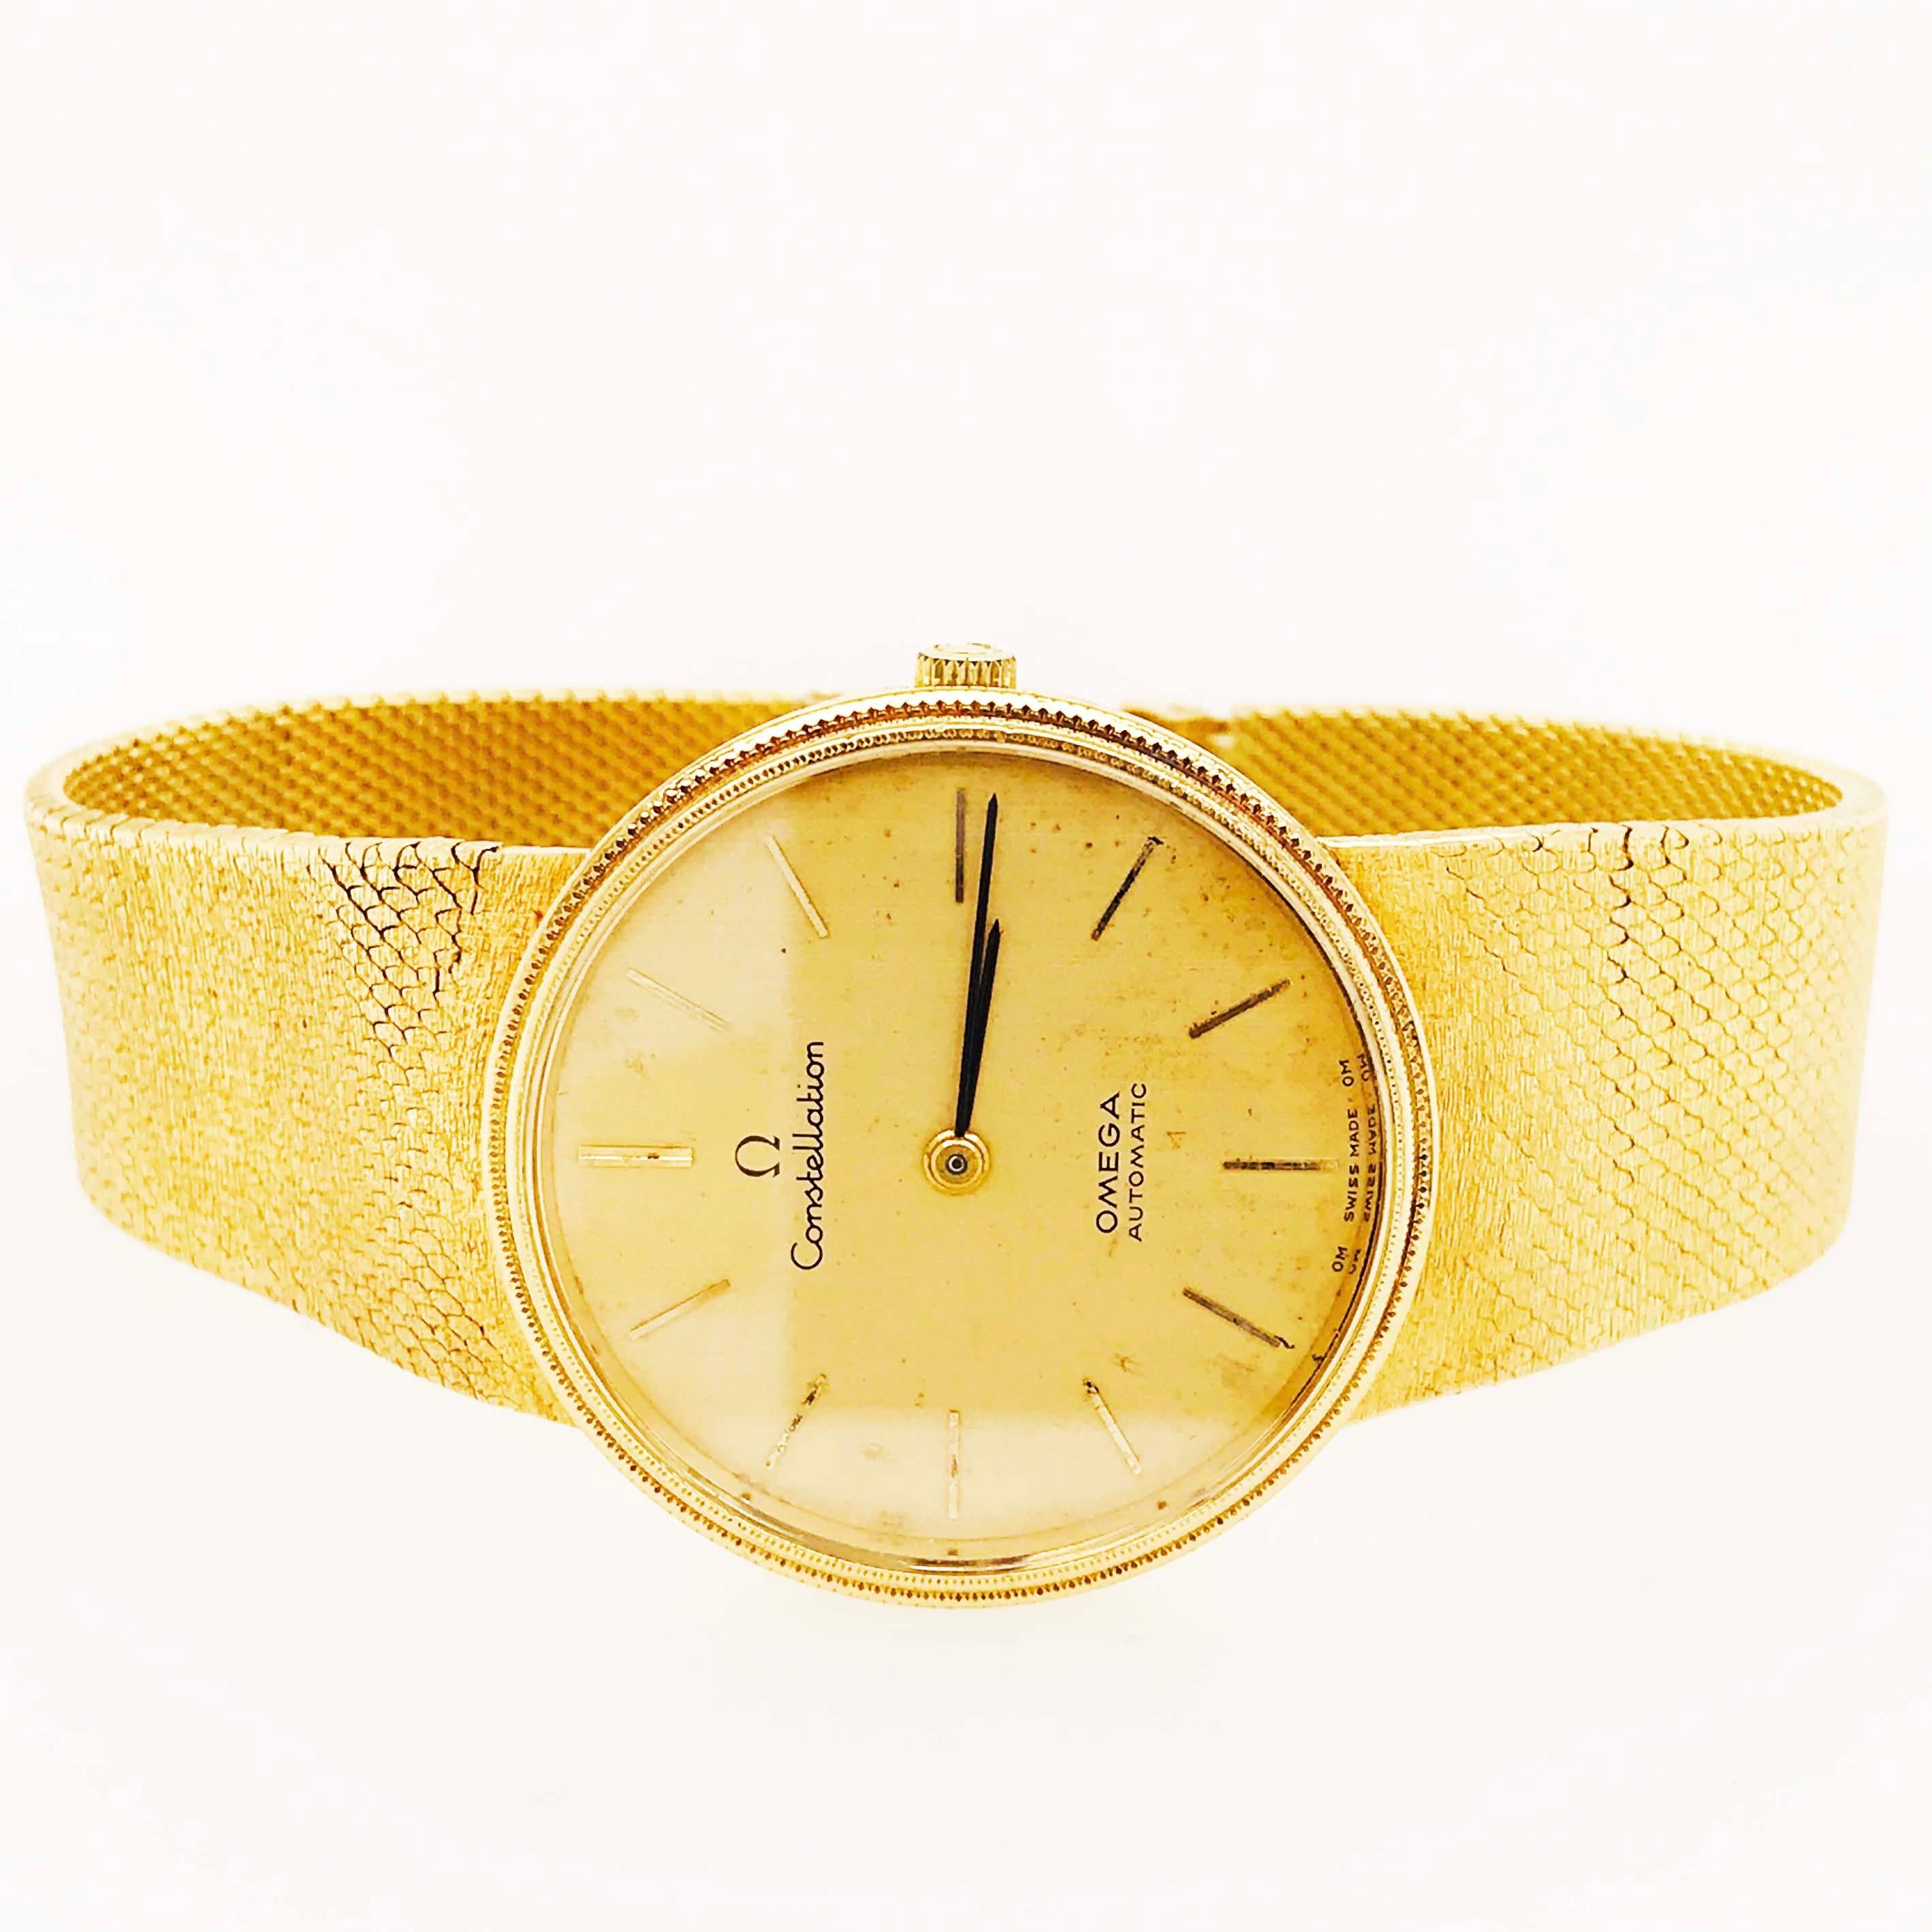 Women's or Men's Omega Gold Watch in 18 Karat Yellow Gold in Excellent Condition, Round Face Case